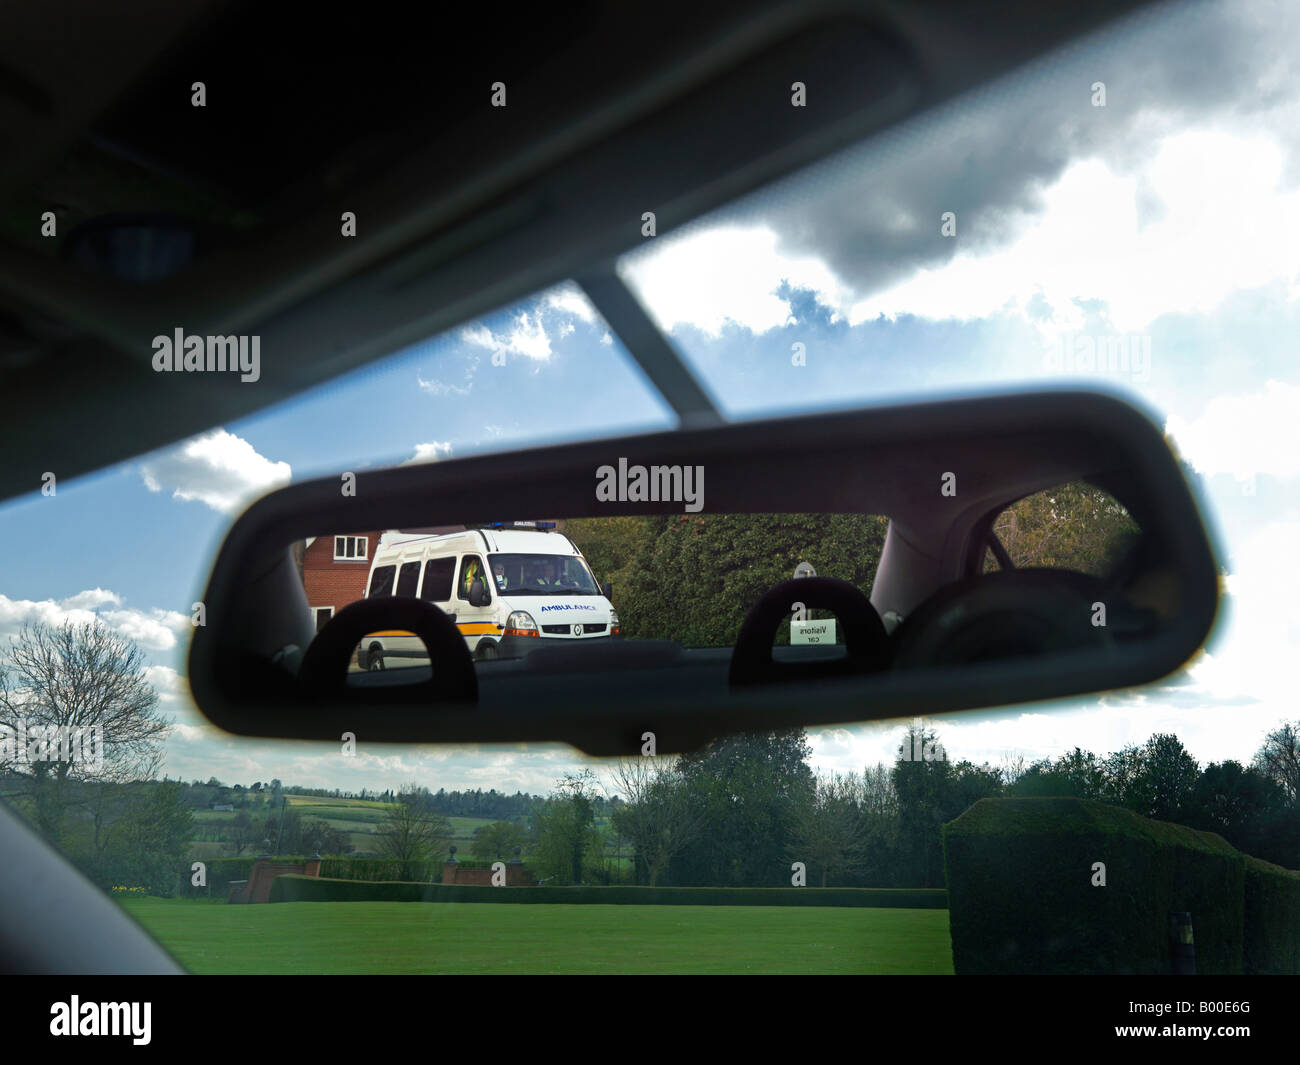 Ambulance in Rear View Mirror Showing Reversed Writing Stock Photo